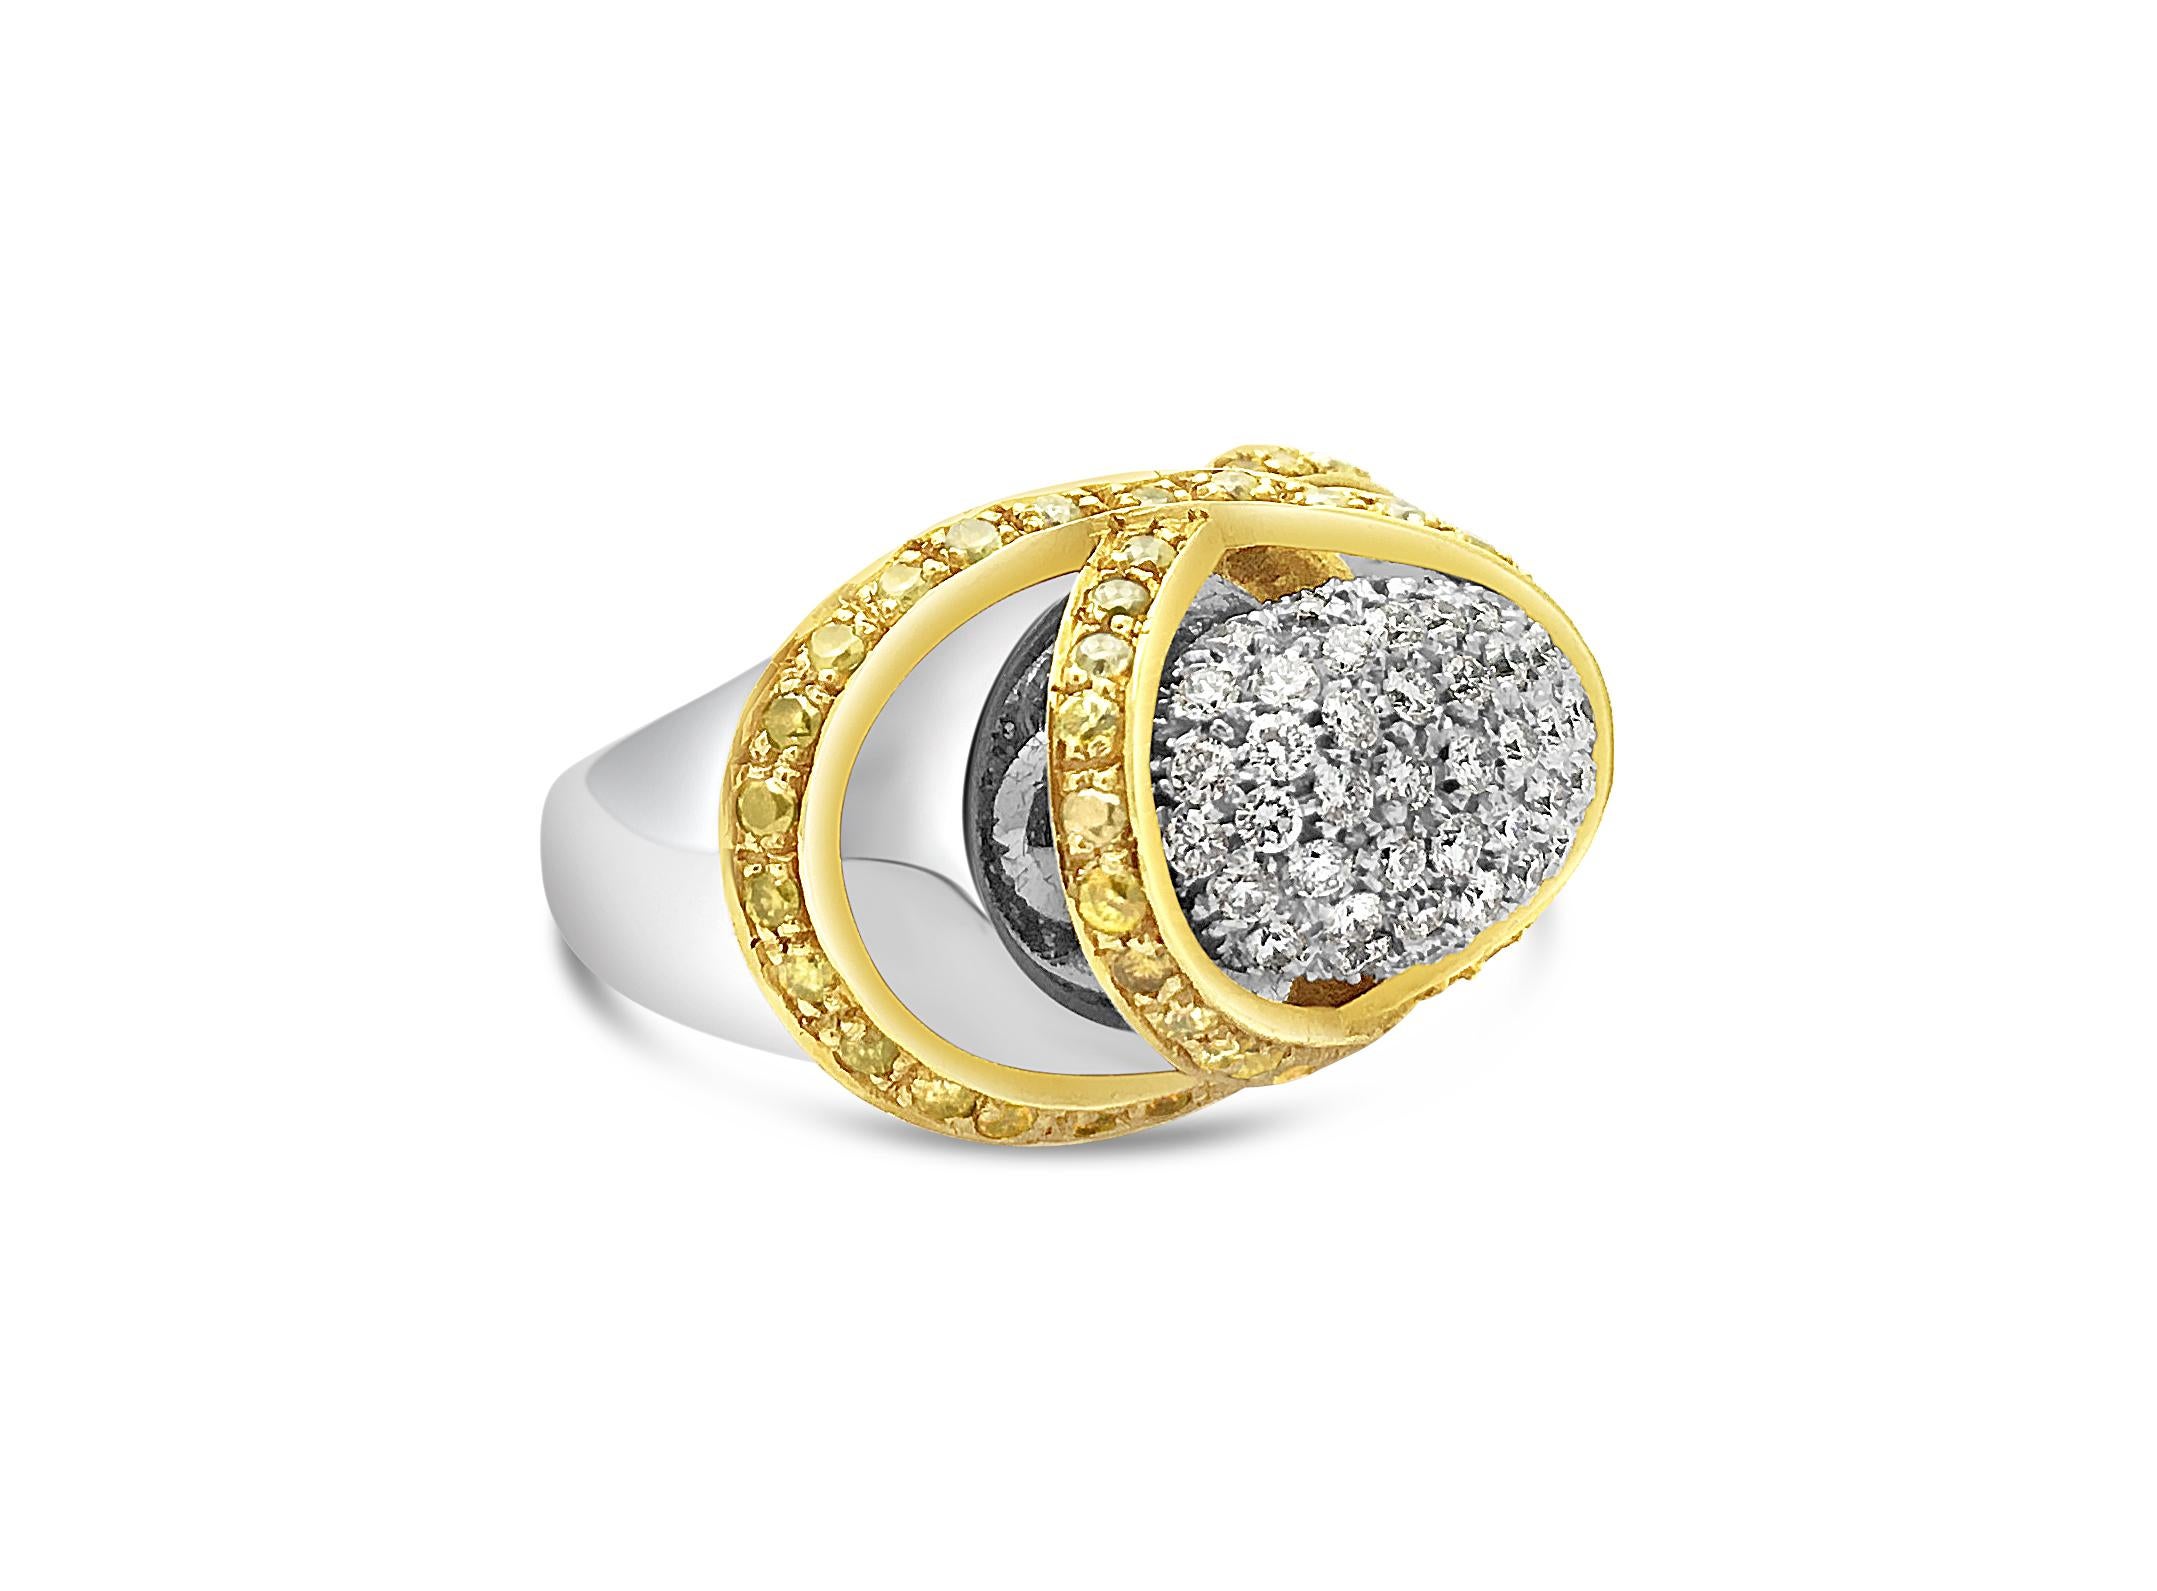 For Sale:  Fancy and colorless diamonds pavè engagement wedding ring 5